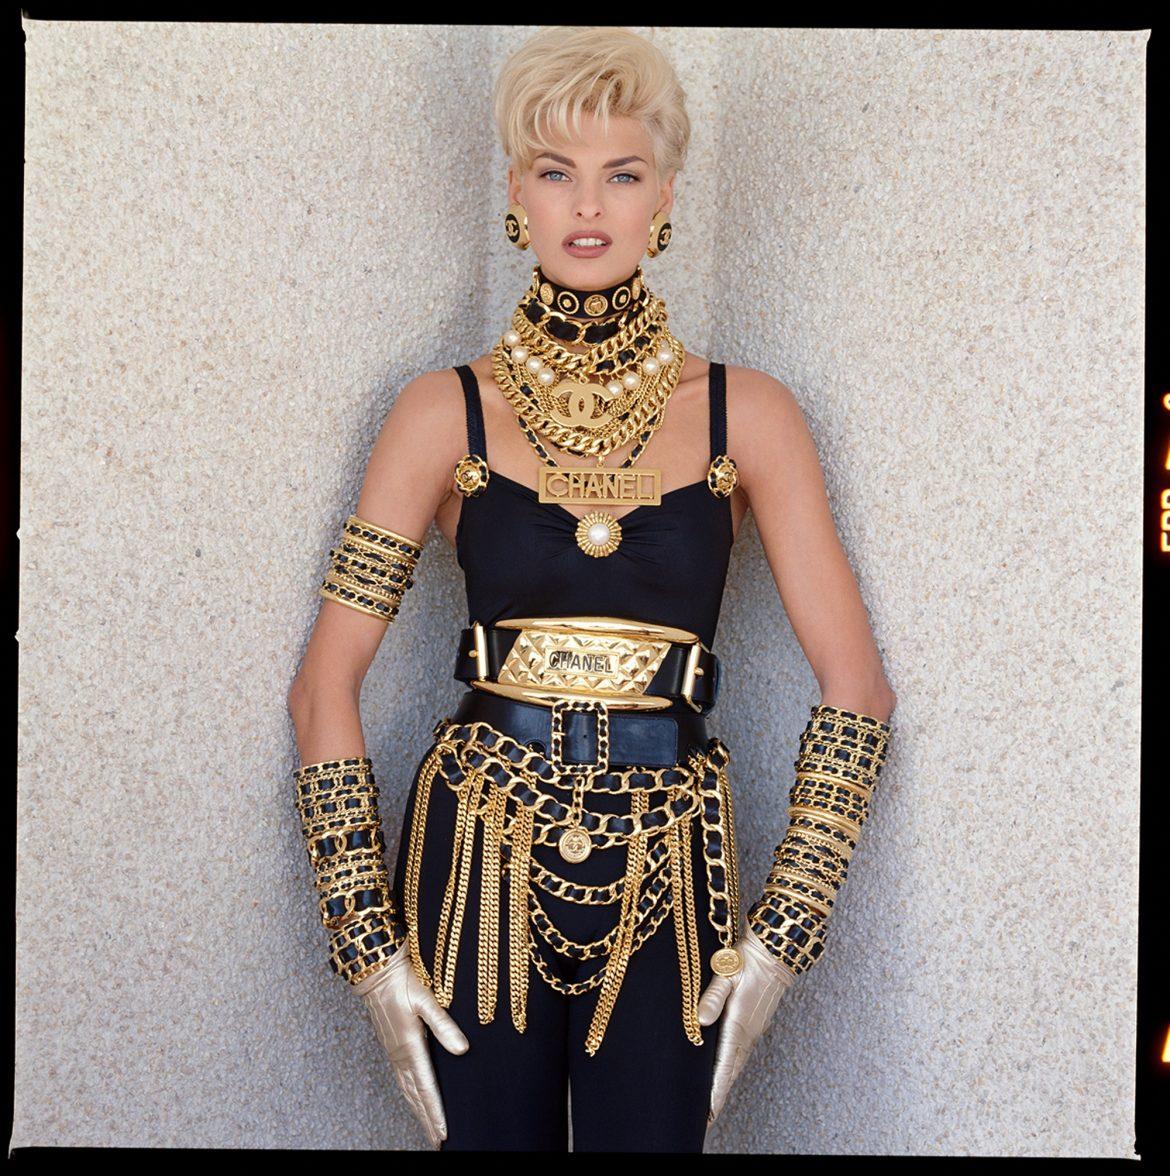 CHANEL vintage rare iconic wide black leather belt featuring a gold toned chain link buckle at the front, CHANEL medallion coin charm and multi chain link tassels surrounding the whole belt.

As seen on super models LINDA EVANGELISTA, KAREN MULDER